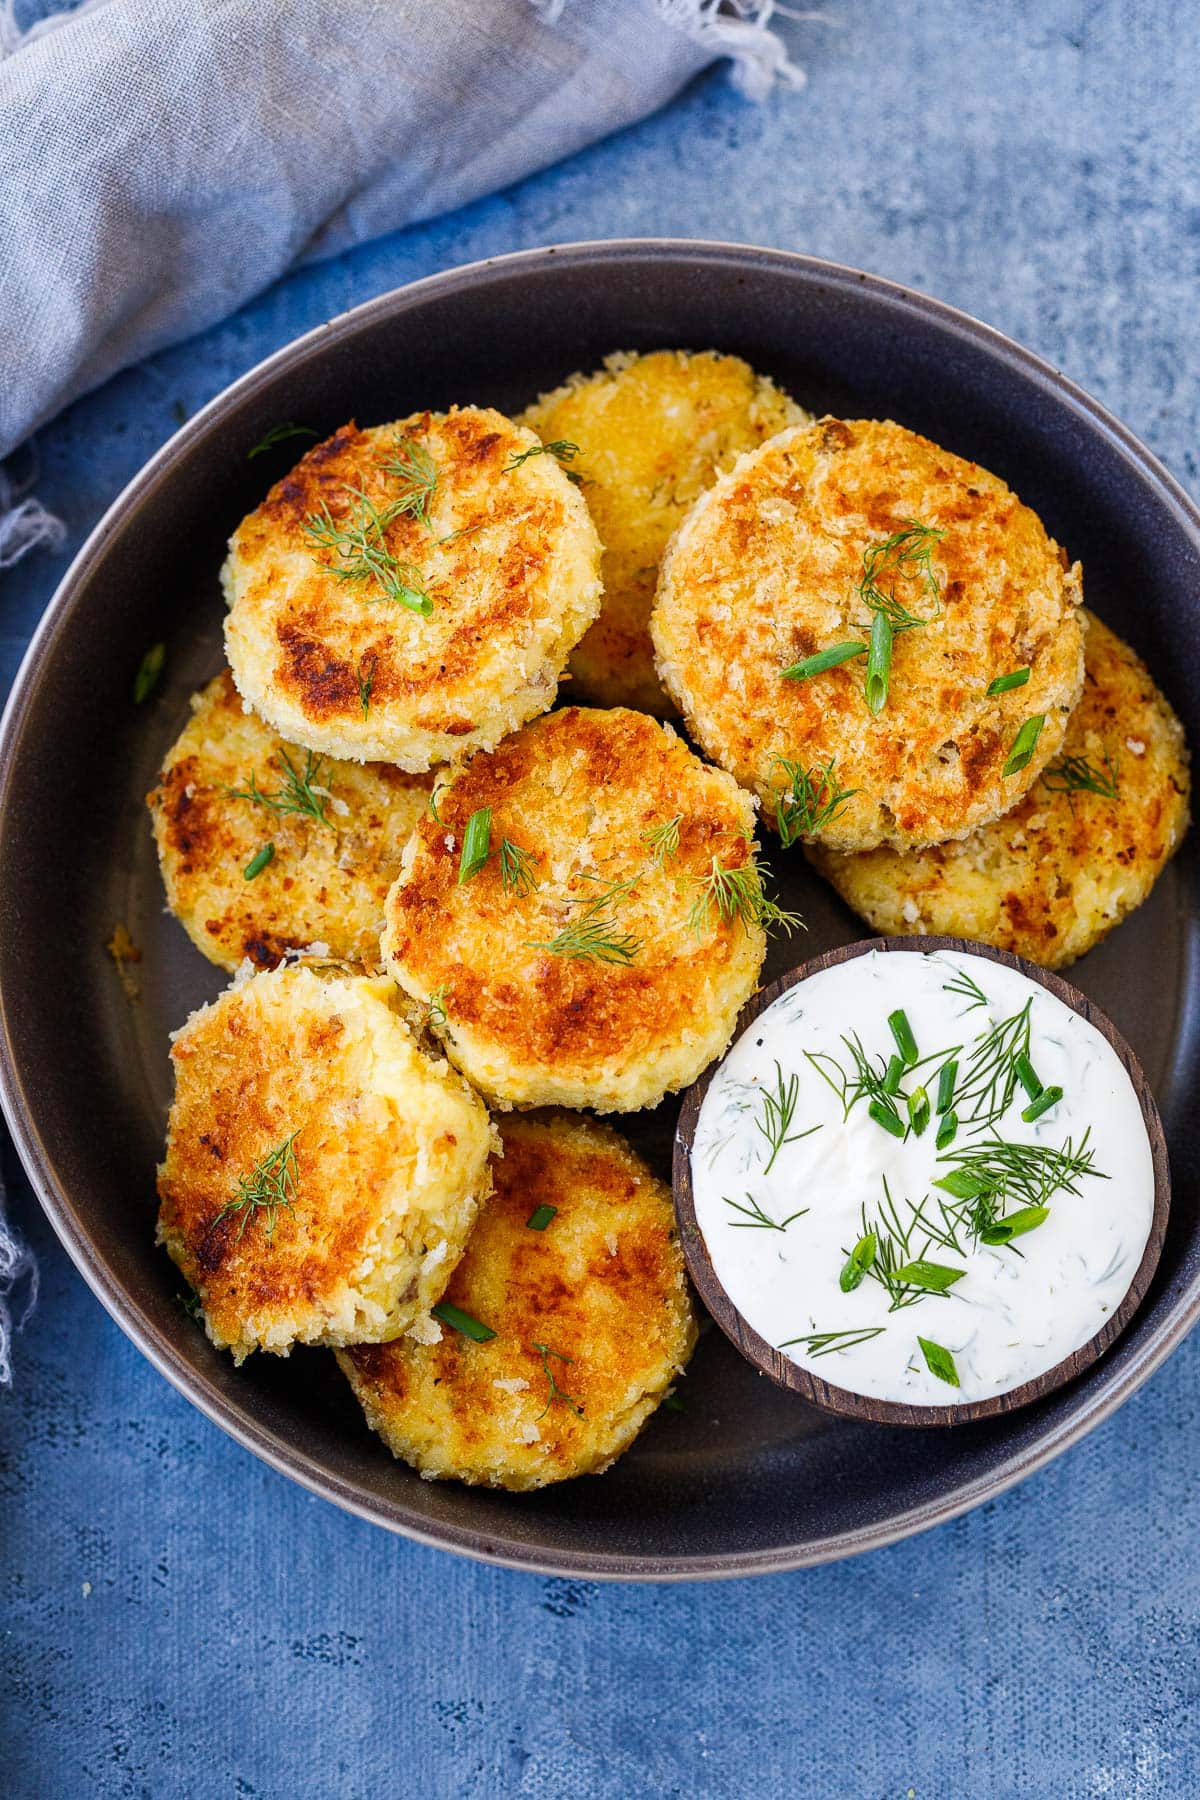 plate with stacked mashed potato cakes garnished with fresh herbs and served with tzatziki sauce